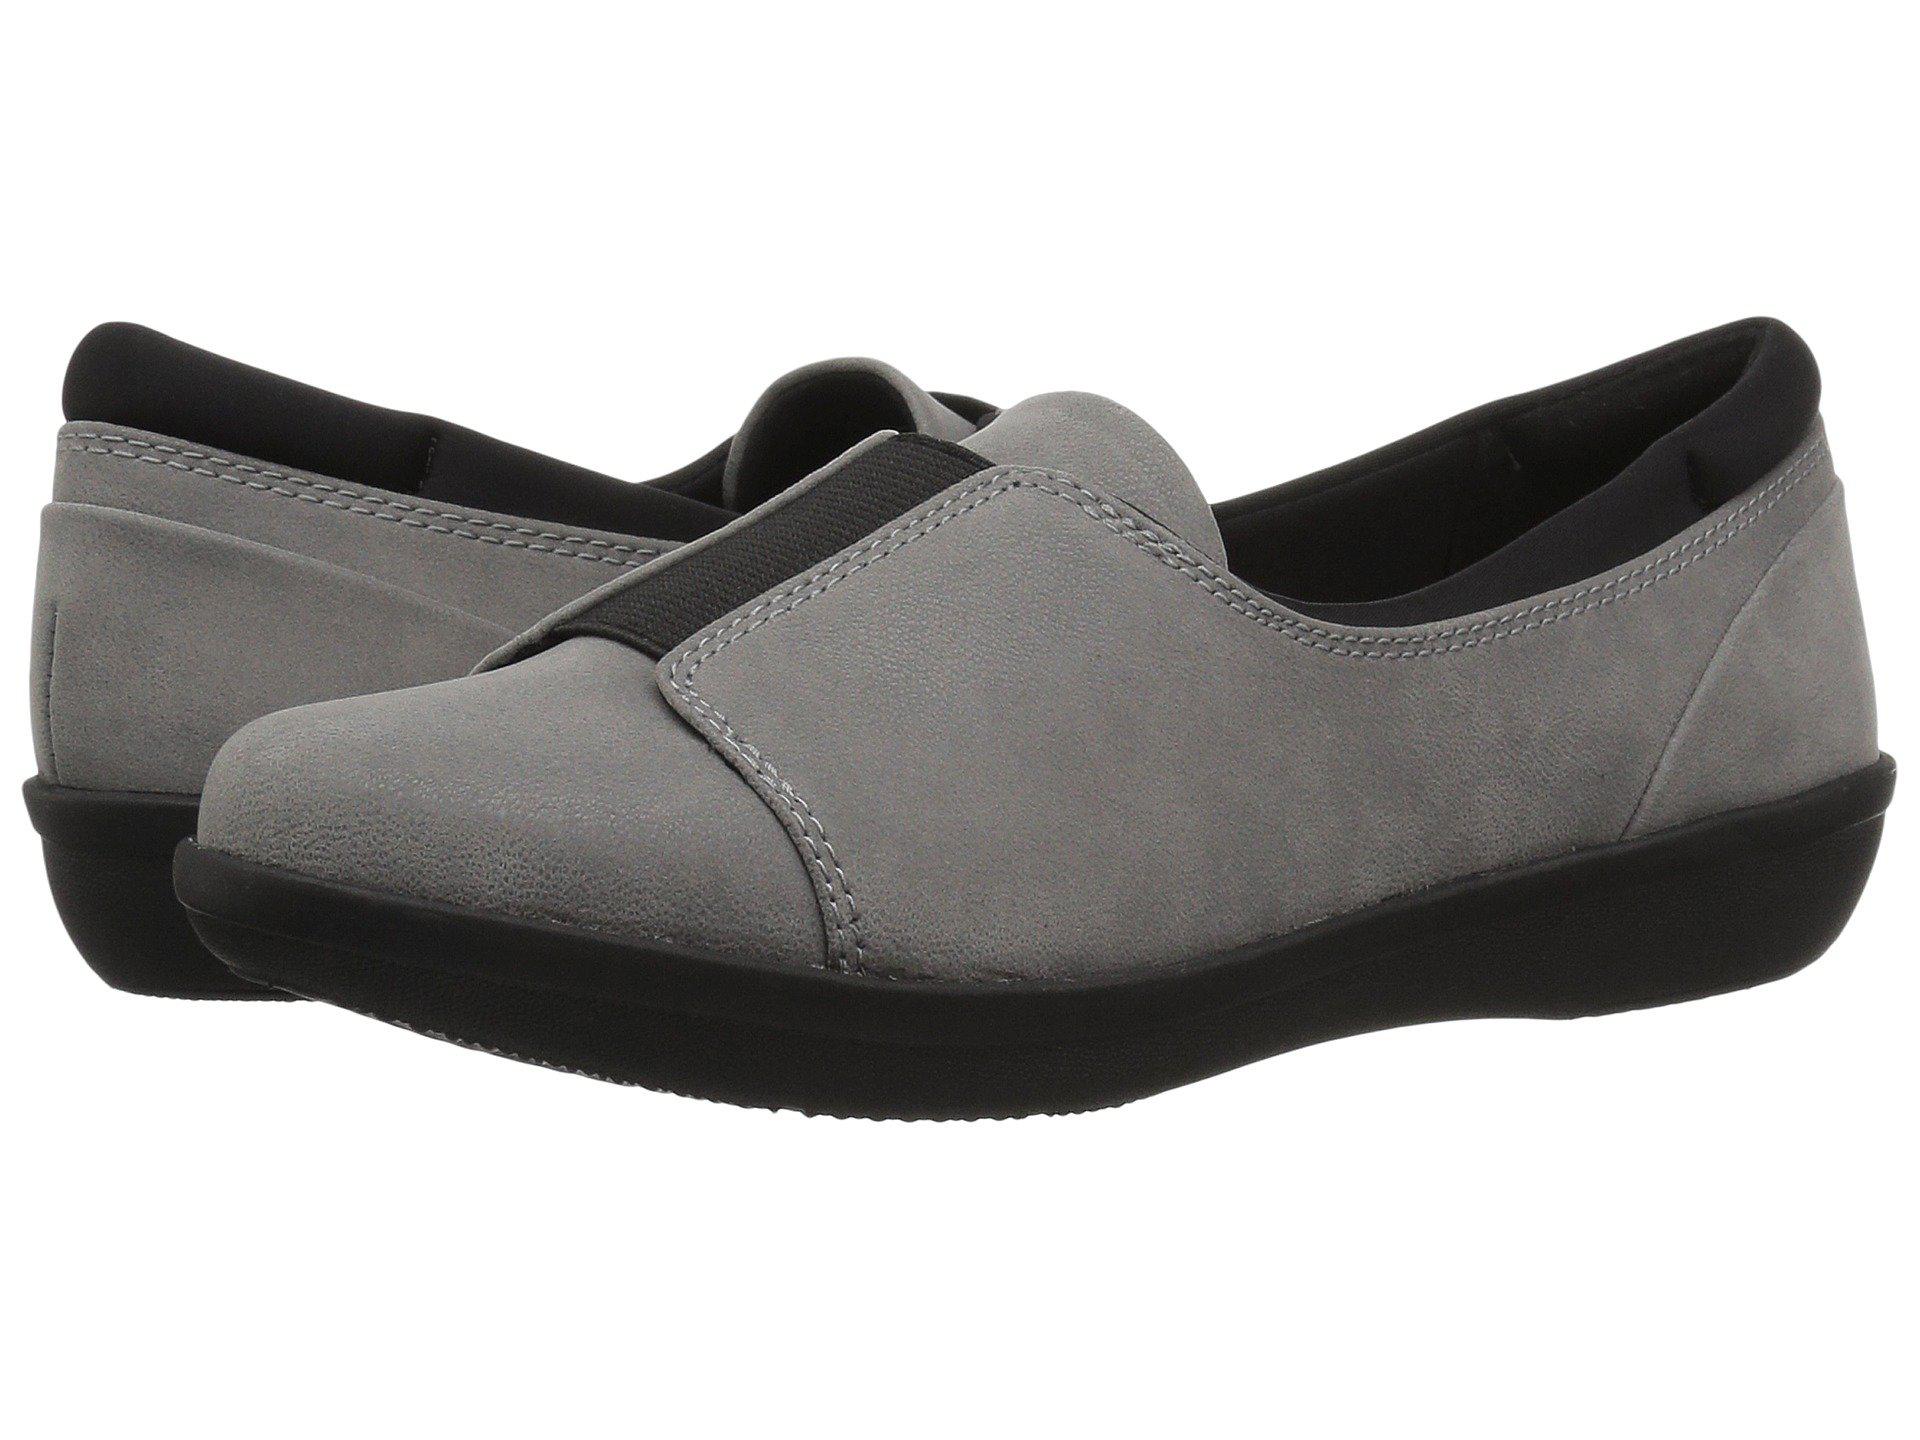 Clarks Ayla Band Loafer in Gray - Save 